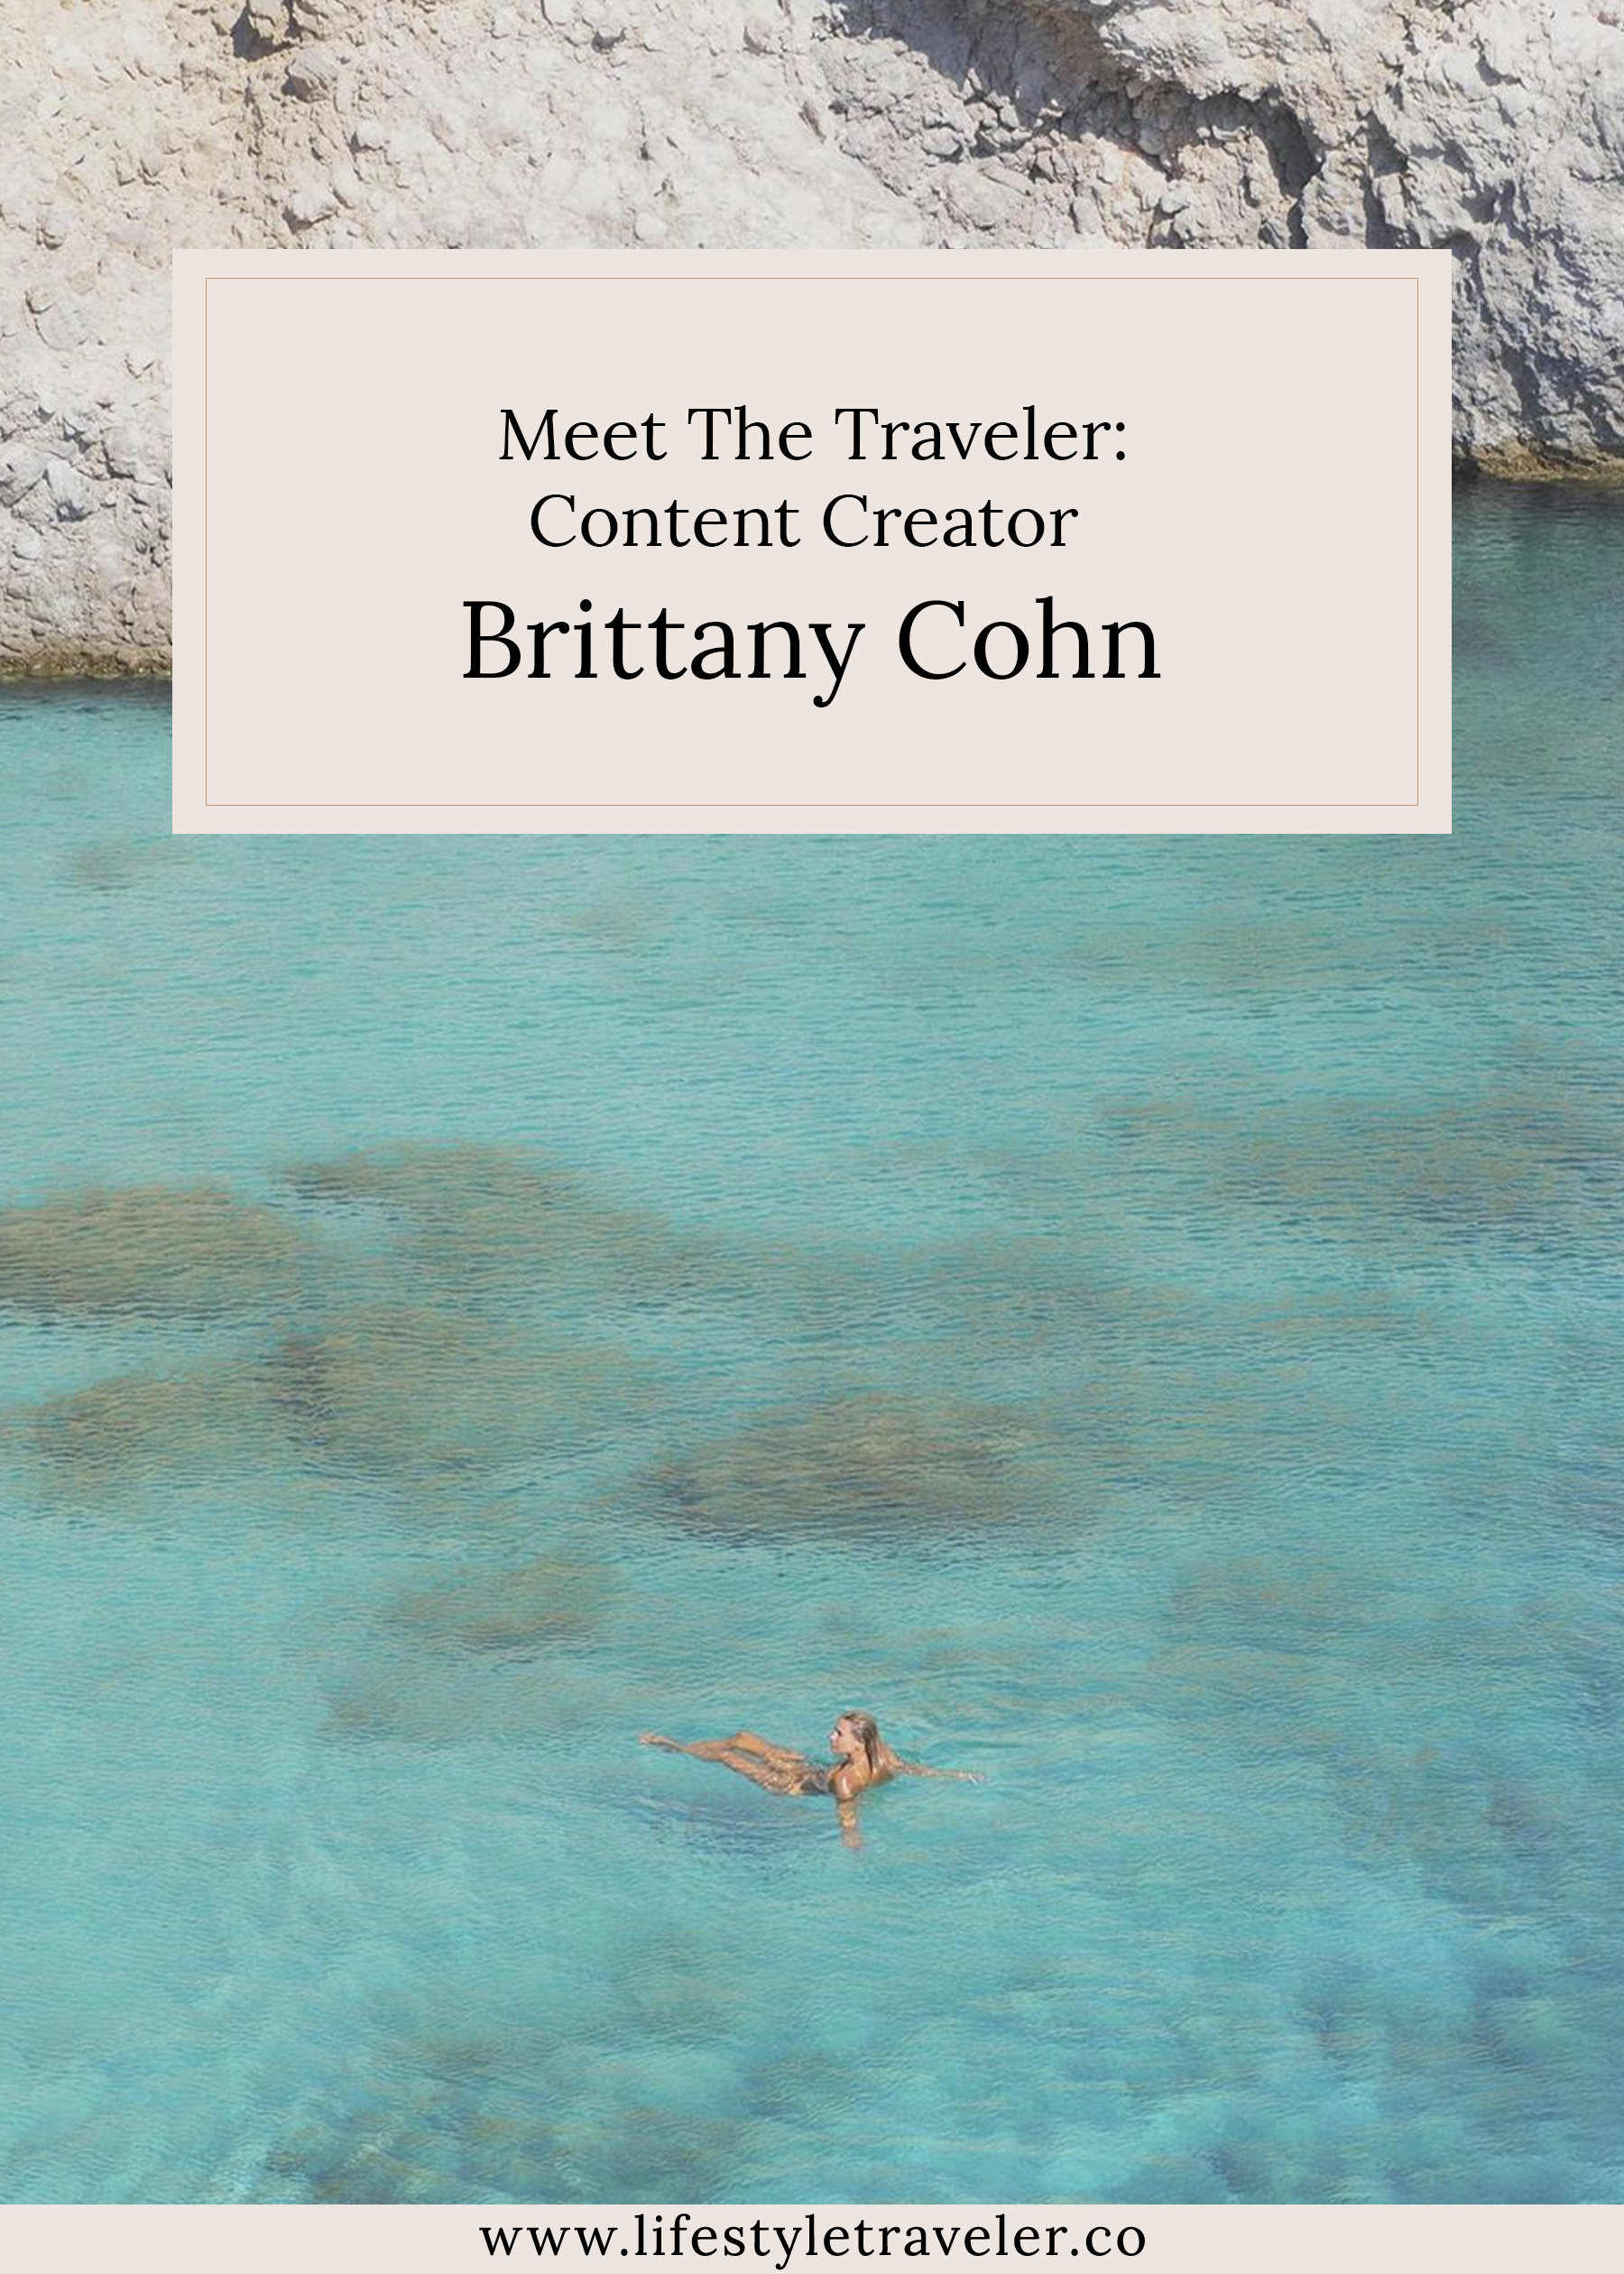 Meet The Traveler: Content Creator Brittany Cohn | lifestyletraveler.co | IG: @lifestyletraveler.co | Photo by: Brittany Cohn